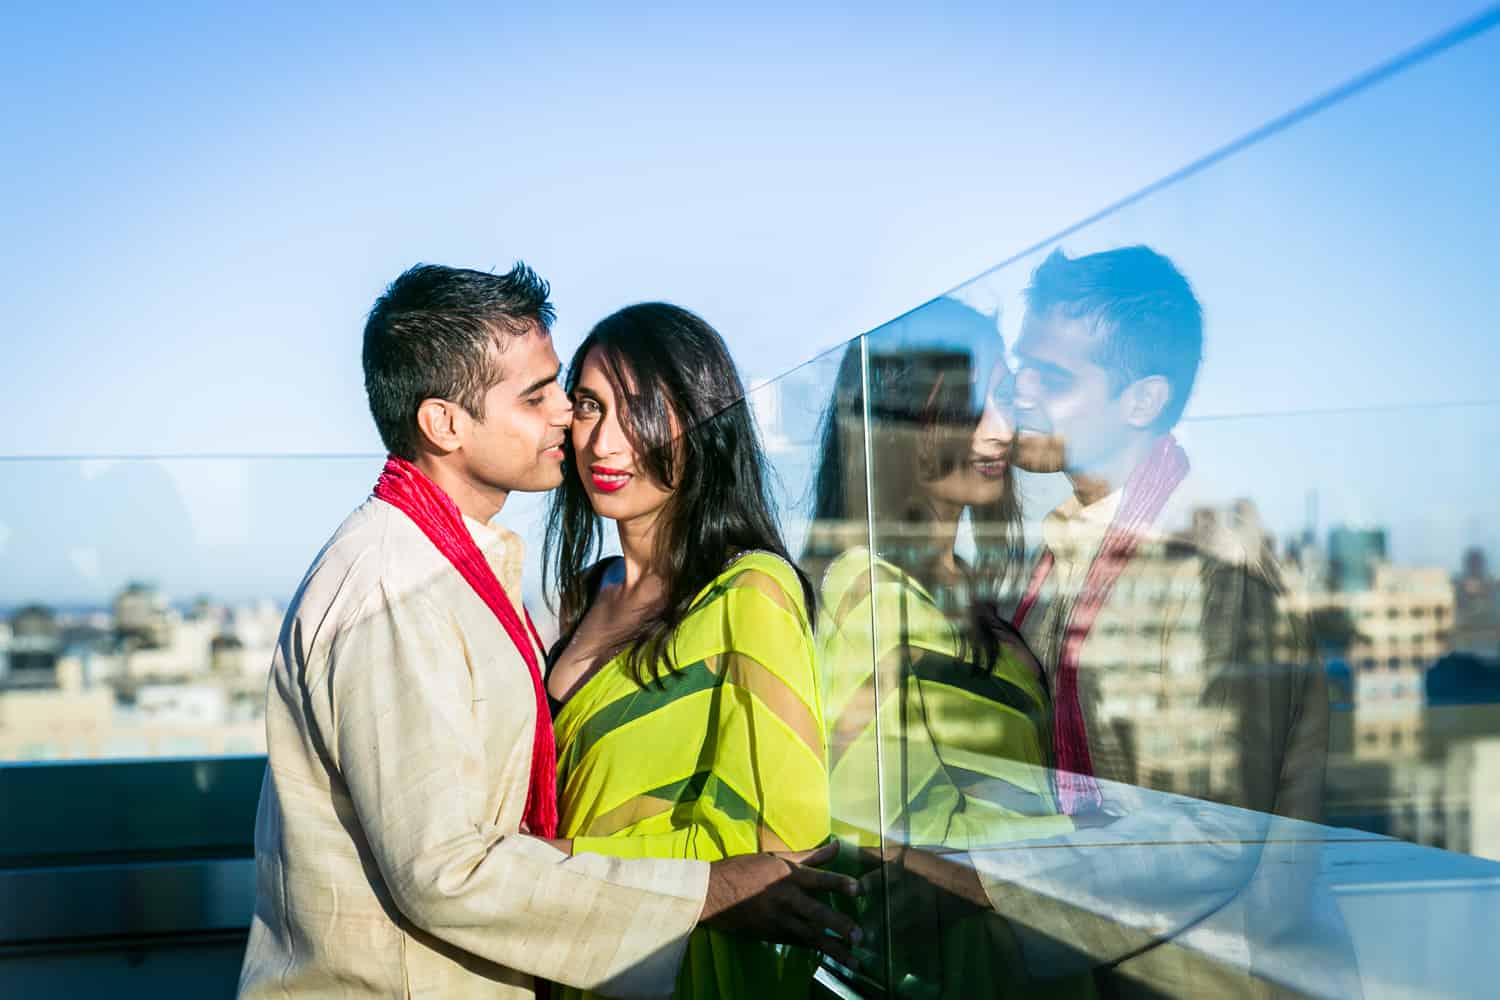 Engaged couple on rooftop wearing traditional Indian attire with reflection in glass wall